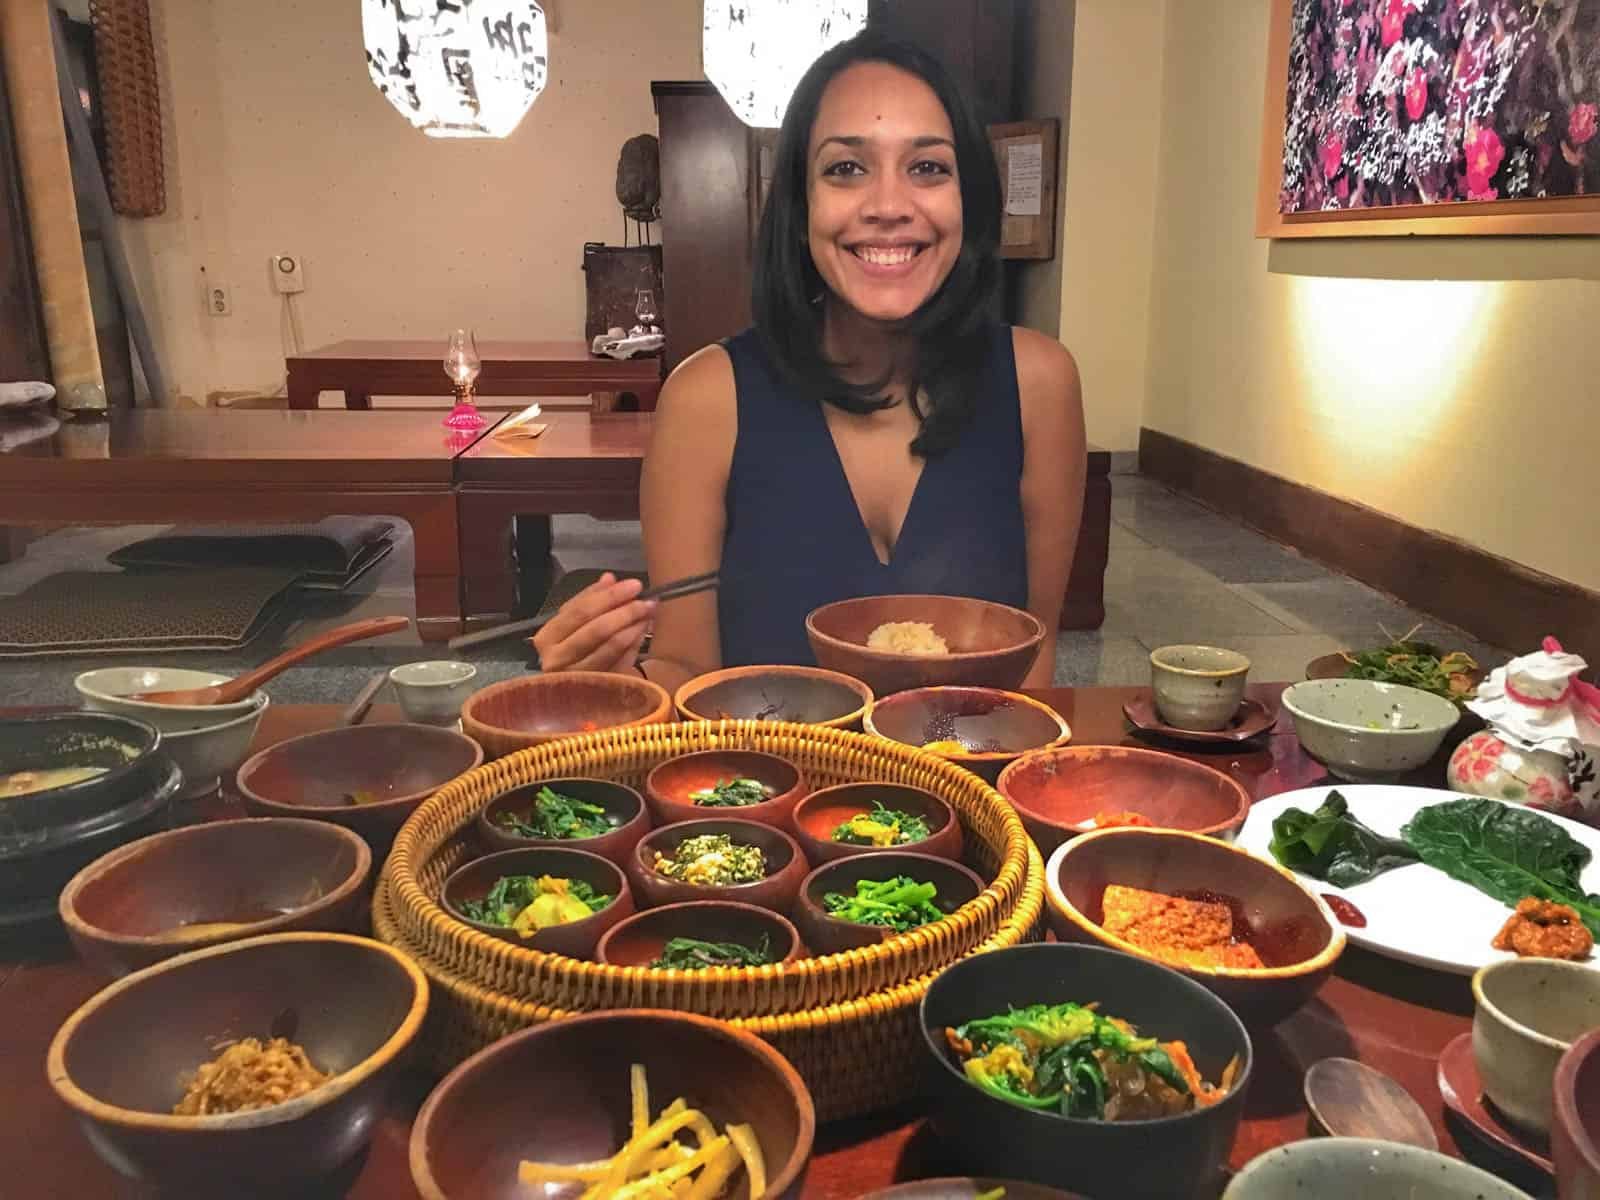 Shruthi with Korean banchan in front of her